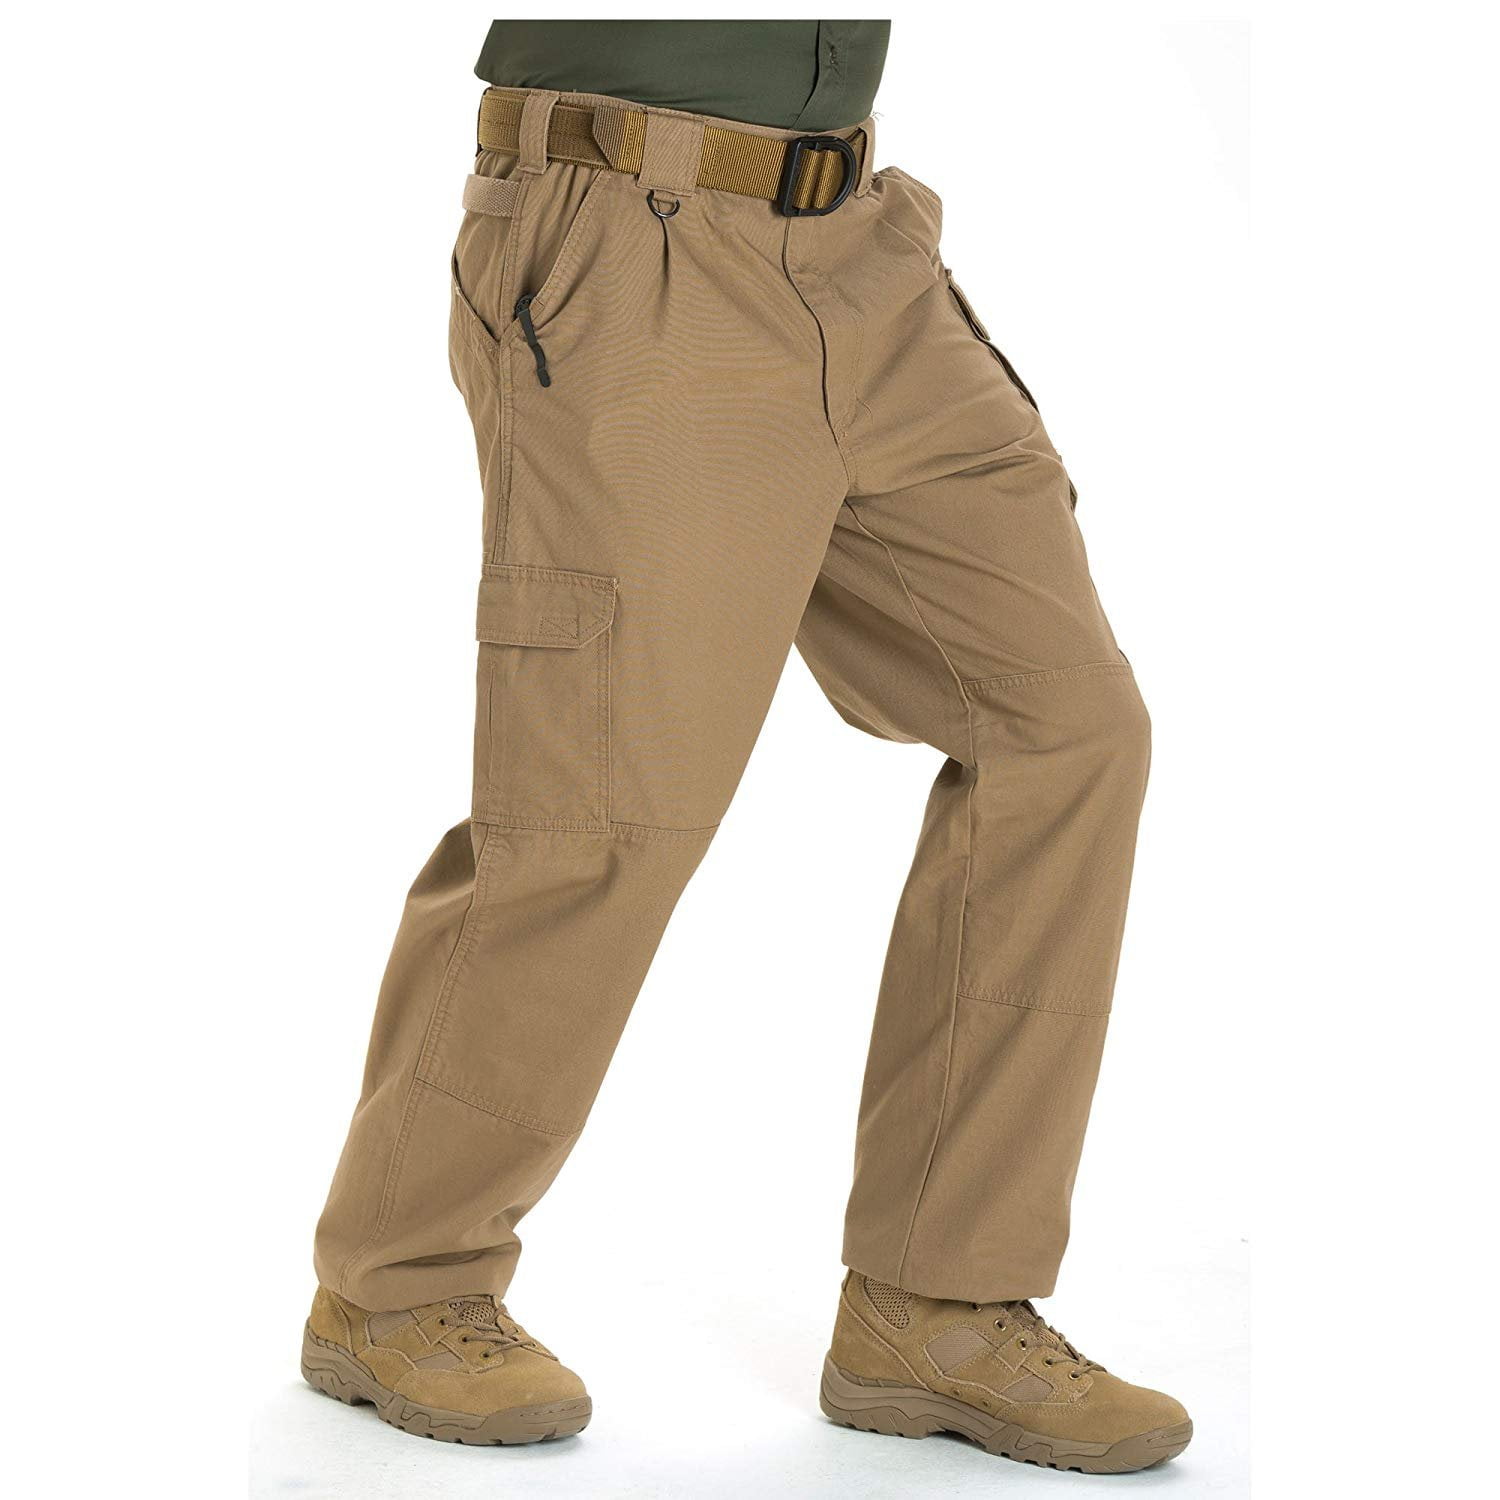 5.11 tactical trousers